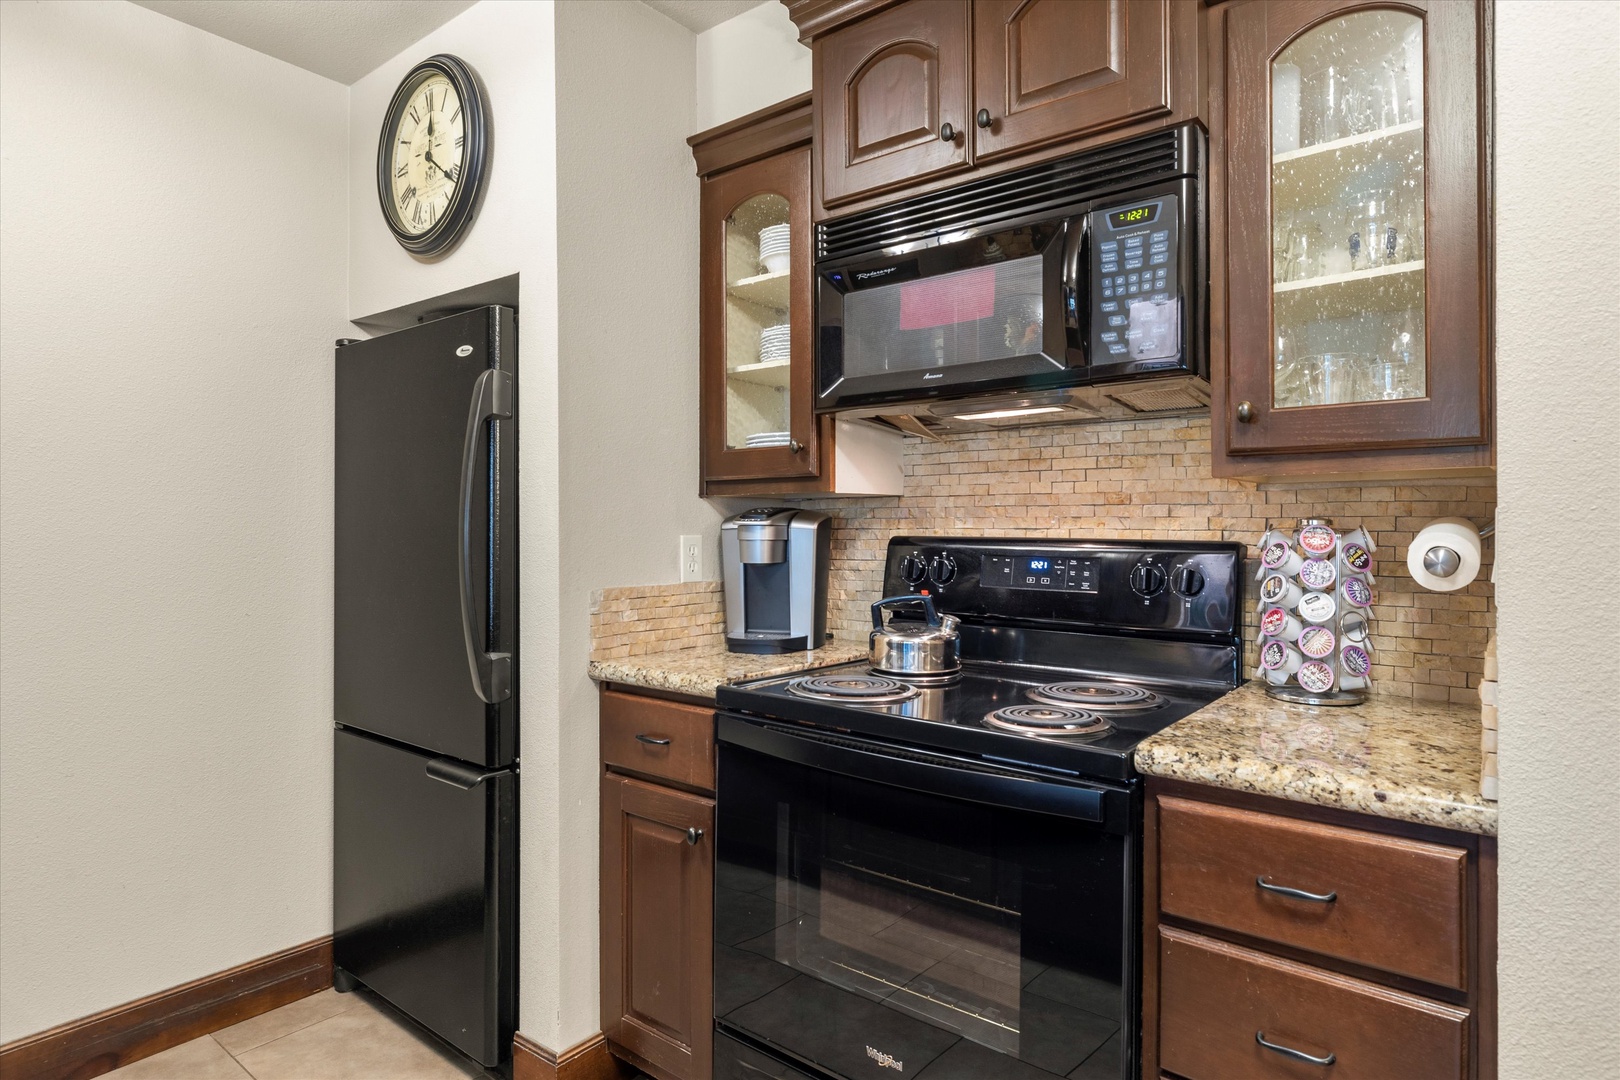 The updated kitchen offers ample space & all the comforts of home